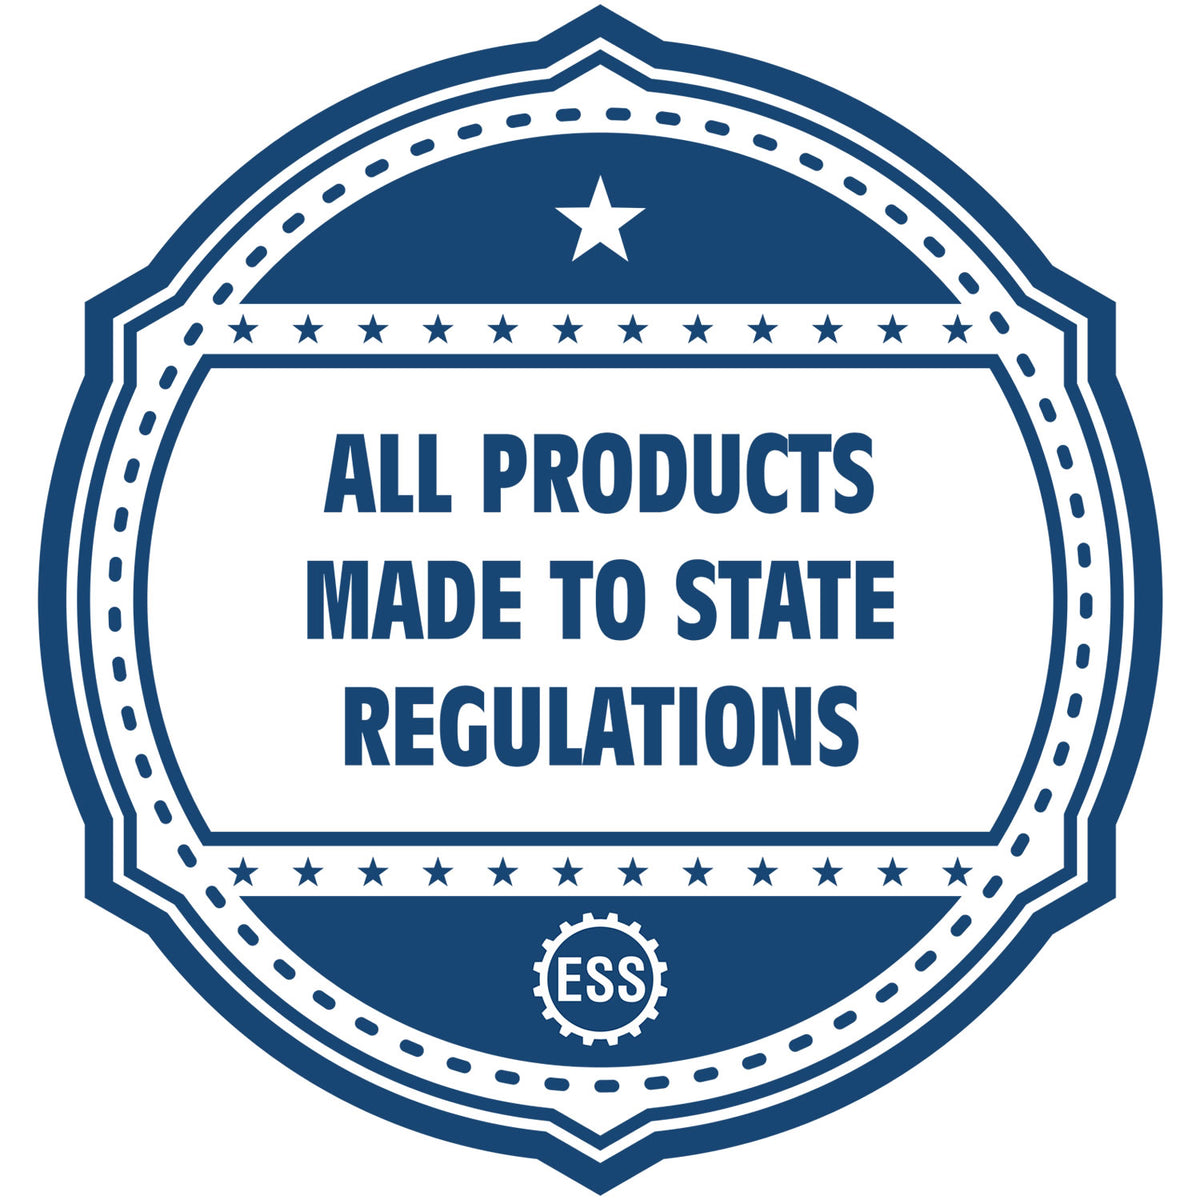 An icon or badge element for the Slim Pre-Inked New Mexico Land Surveyor Seal Stamp showing that this product is made in compliance with state regulations.